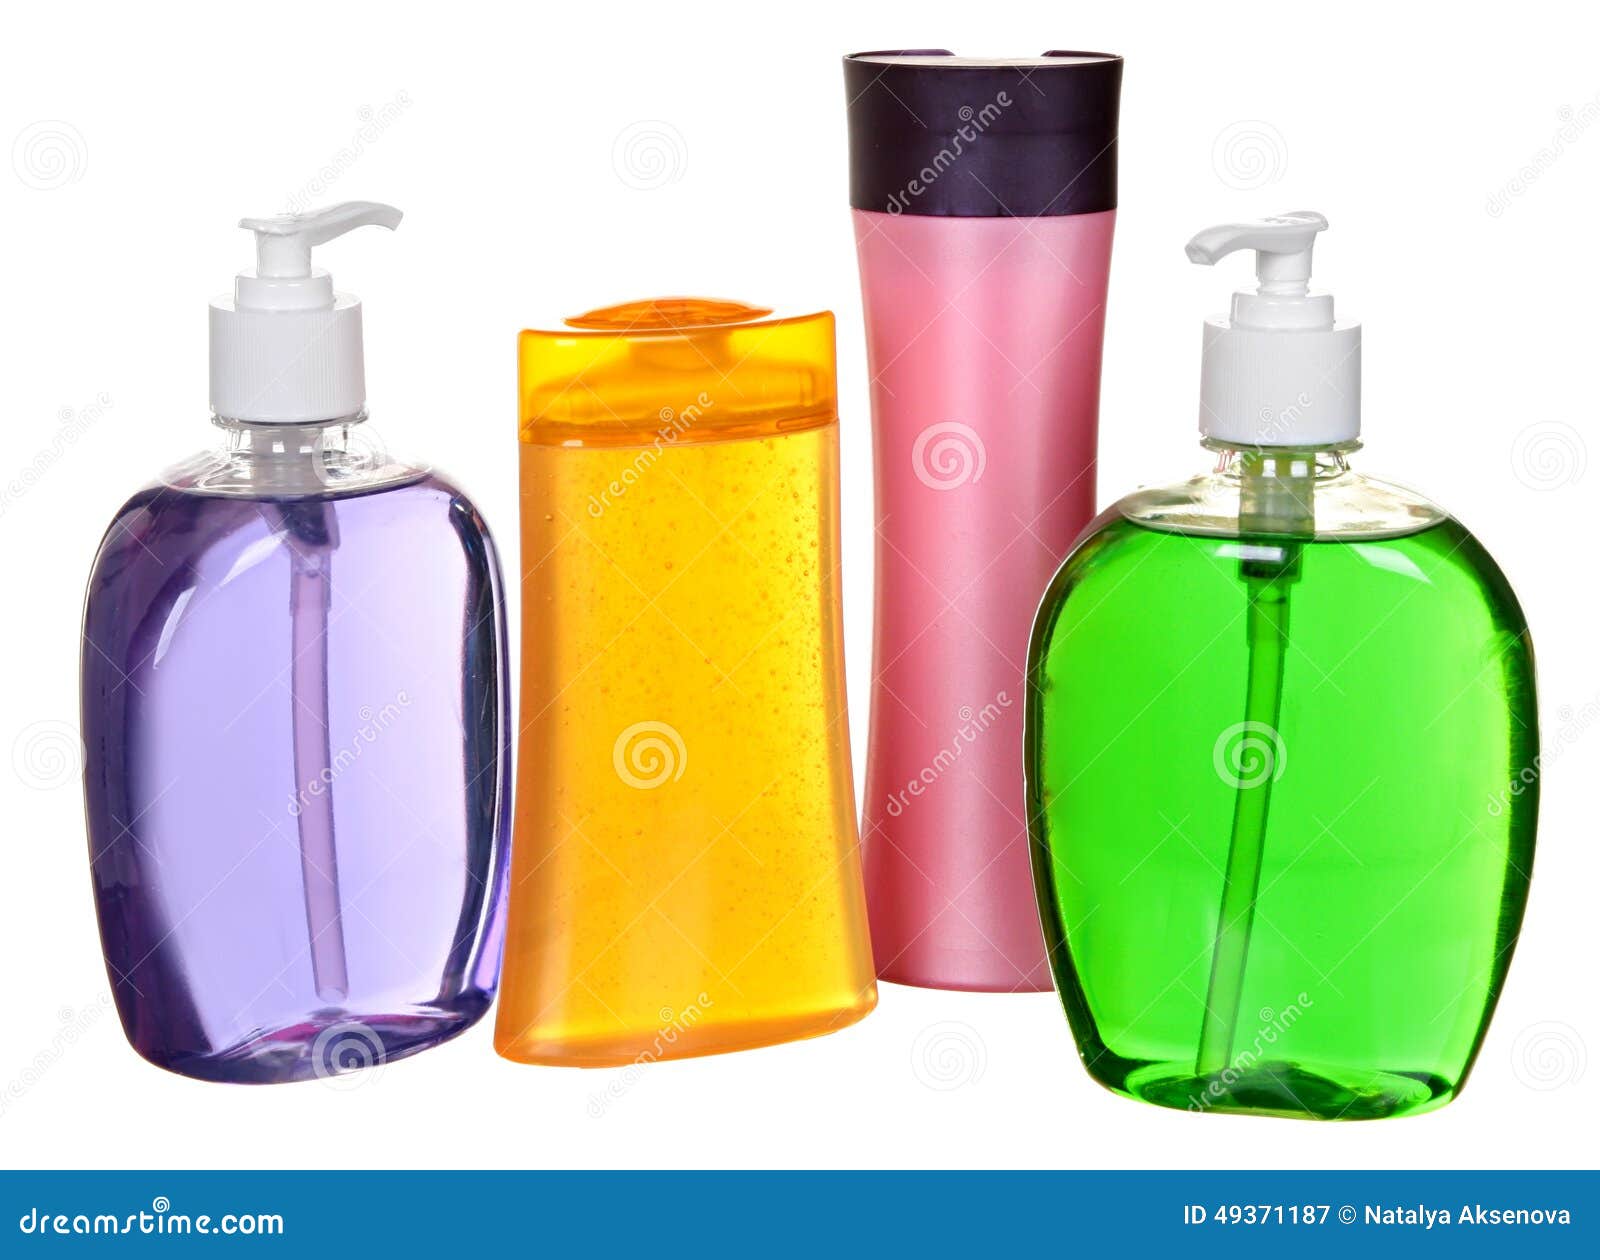 colored plastic bottles with liquid soap and